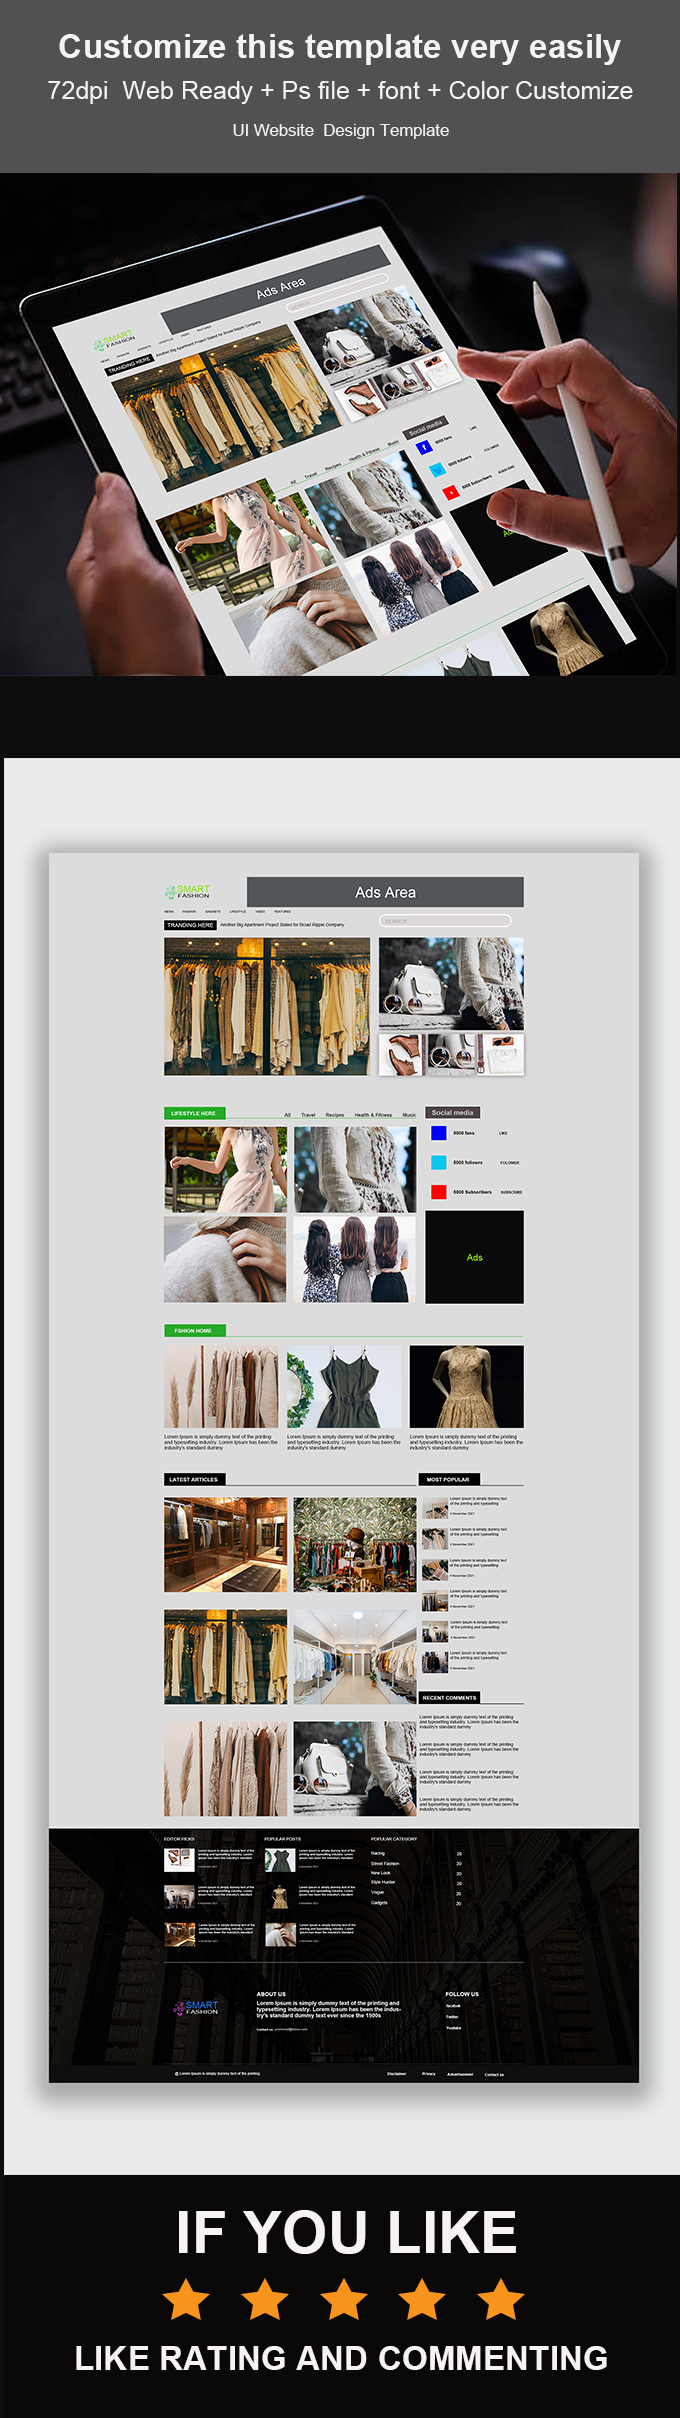 Fashion House eCommerce PSD Template